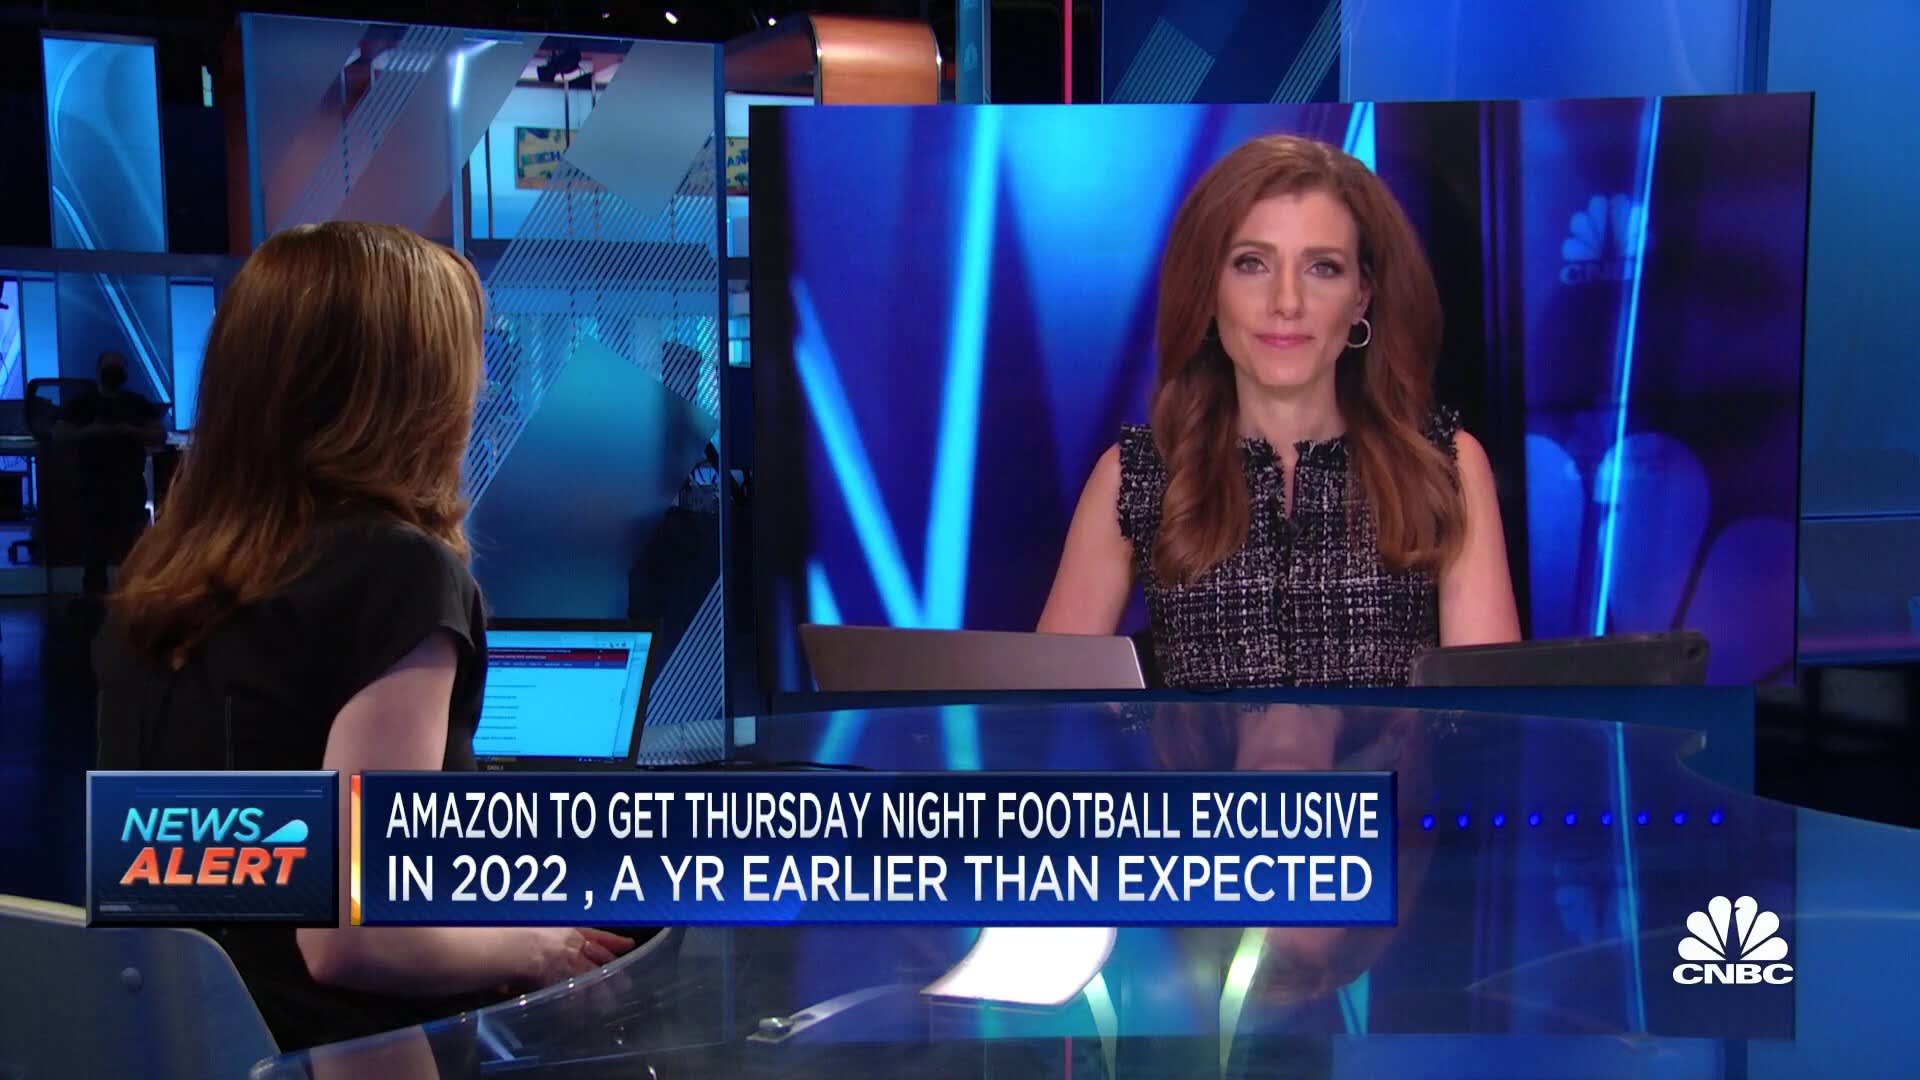 Amazon to get Thursday Night Football exclusive in 2022, earlier than